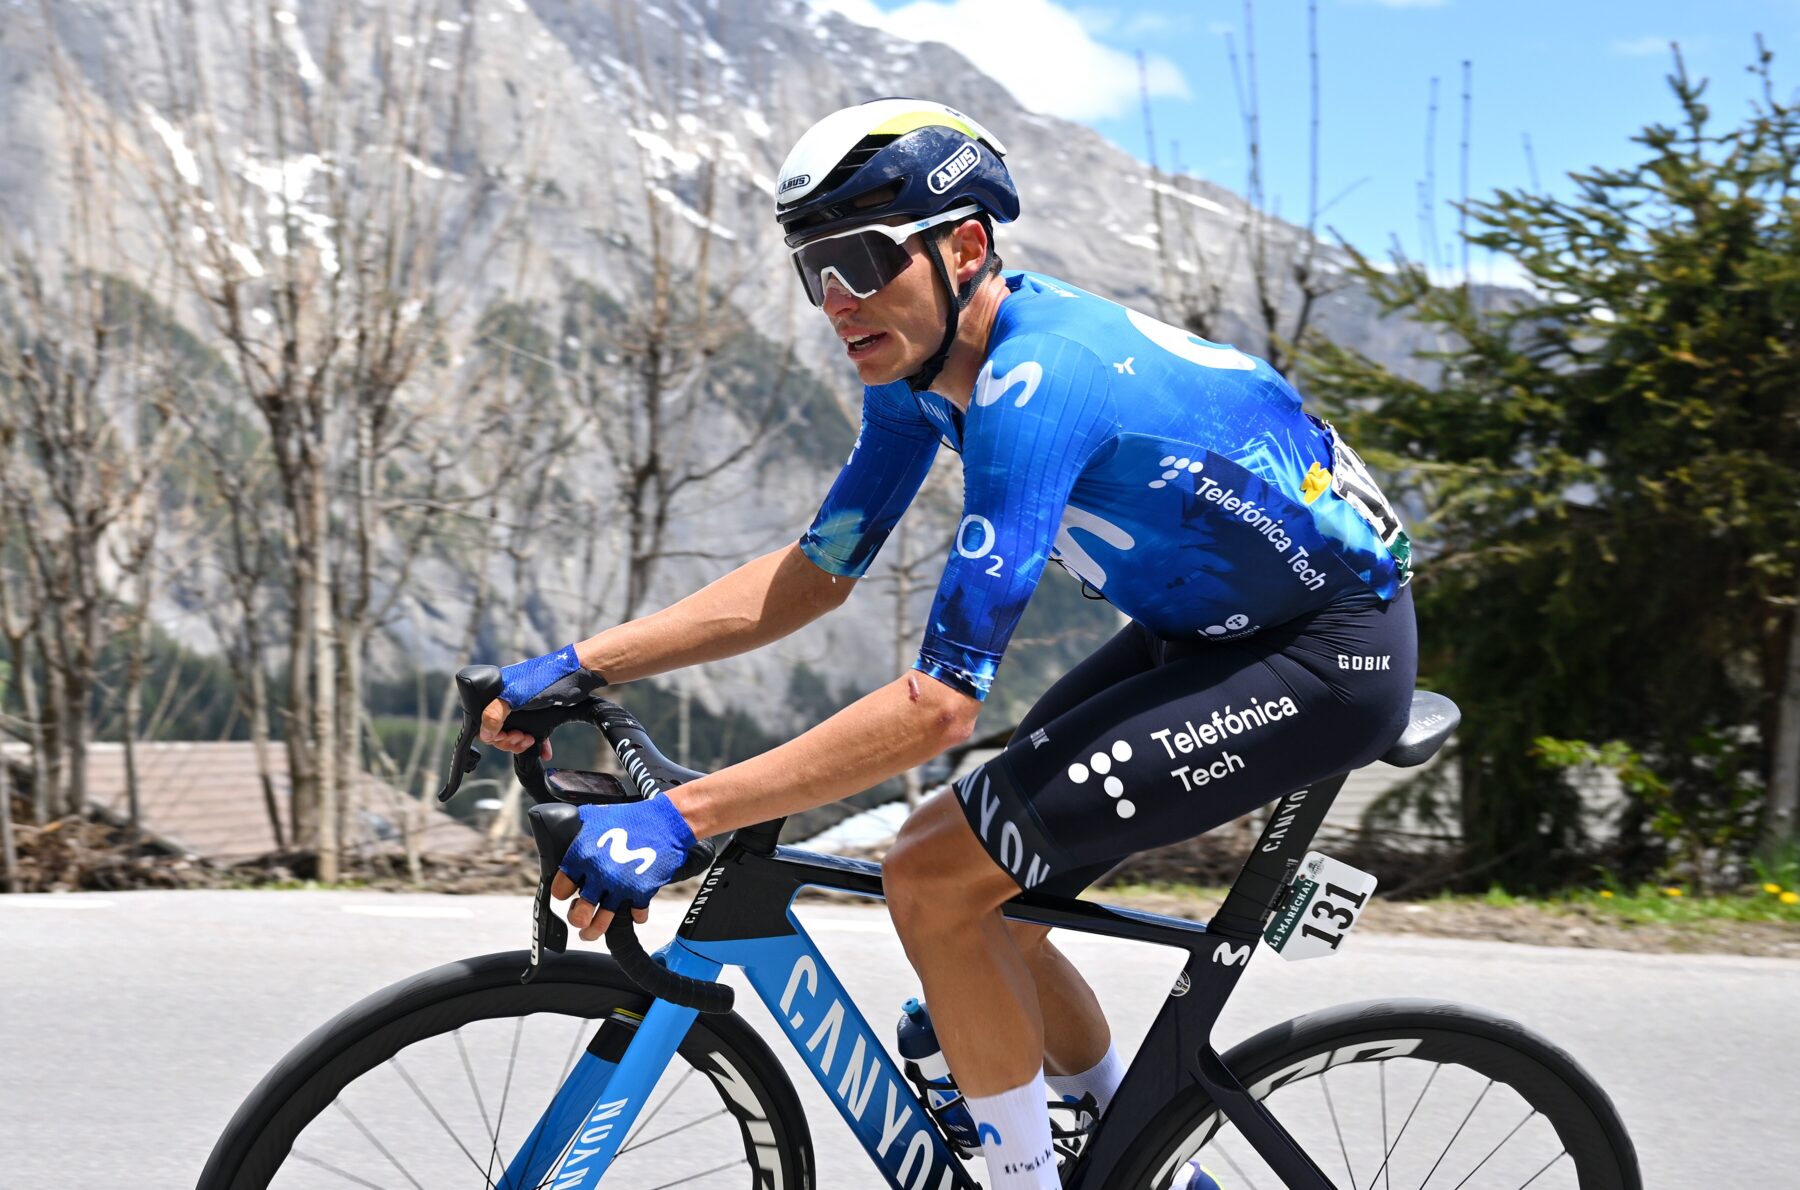 Enric Mas (4th) fares well at Queen stage to Leysin, climbs onto sixth overall